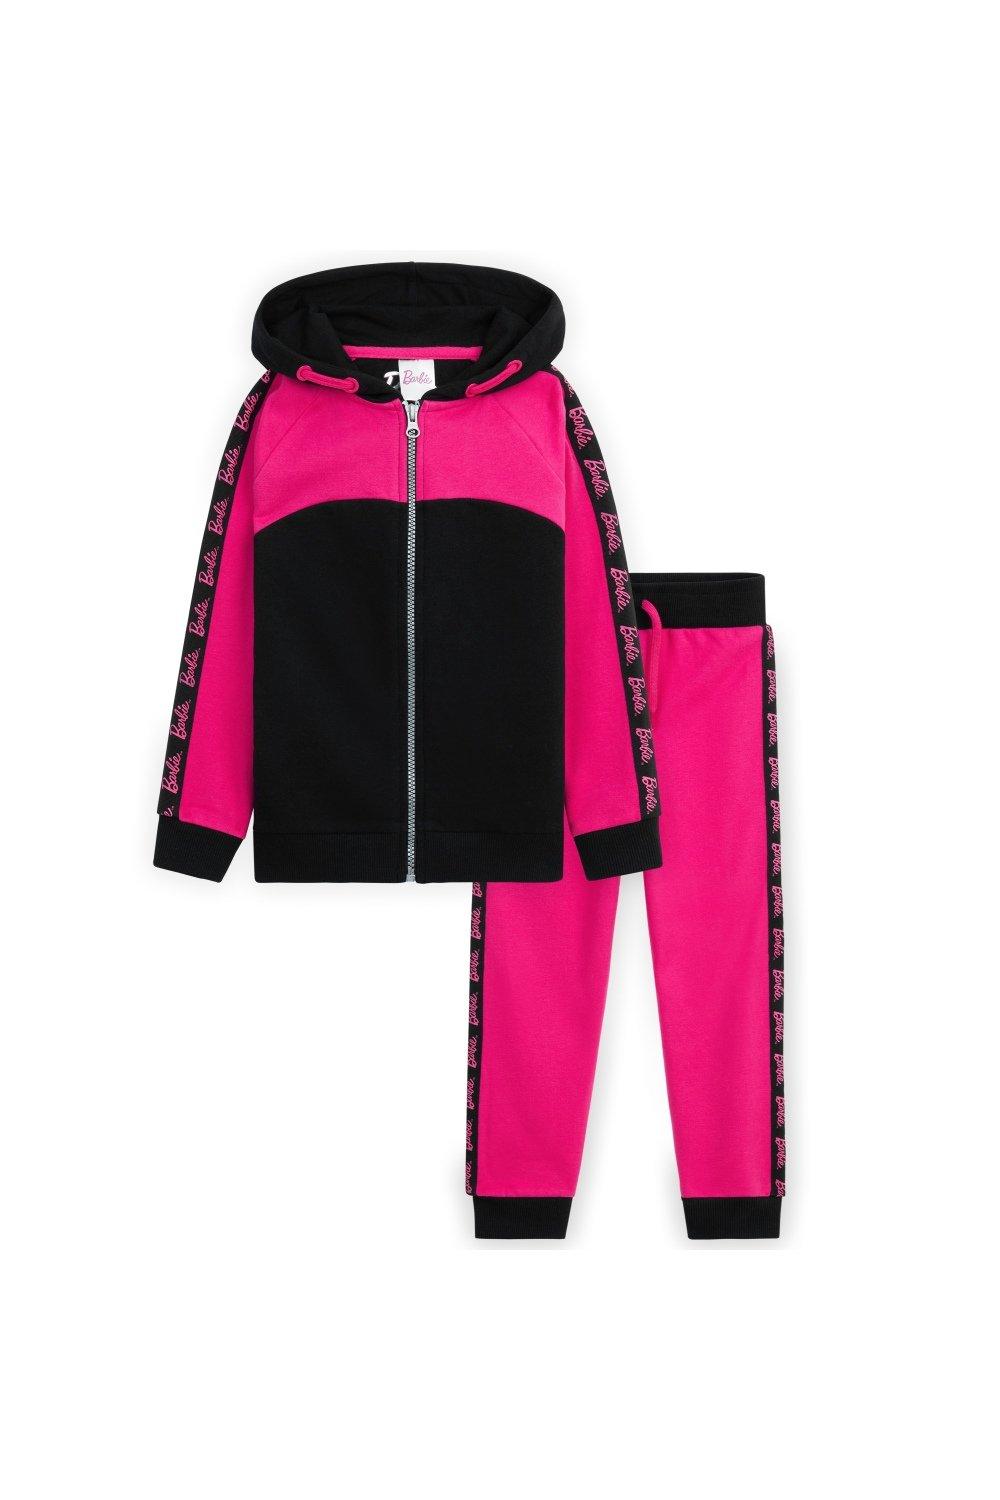 Tracksuit Set - Zip Up Hoodie and Joggers